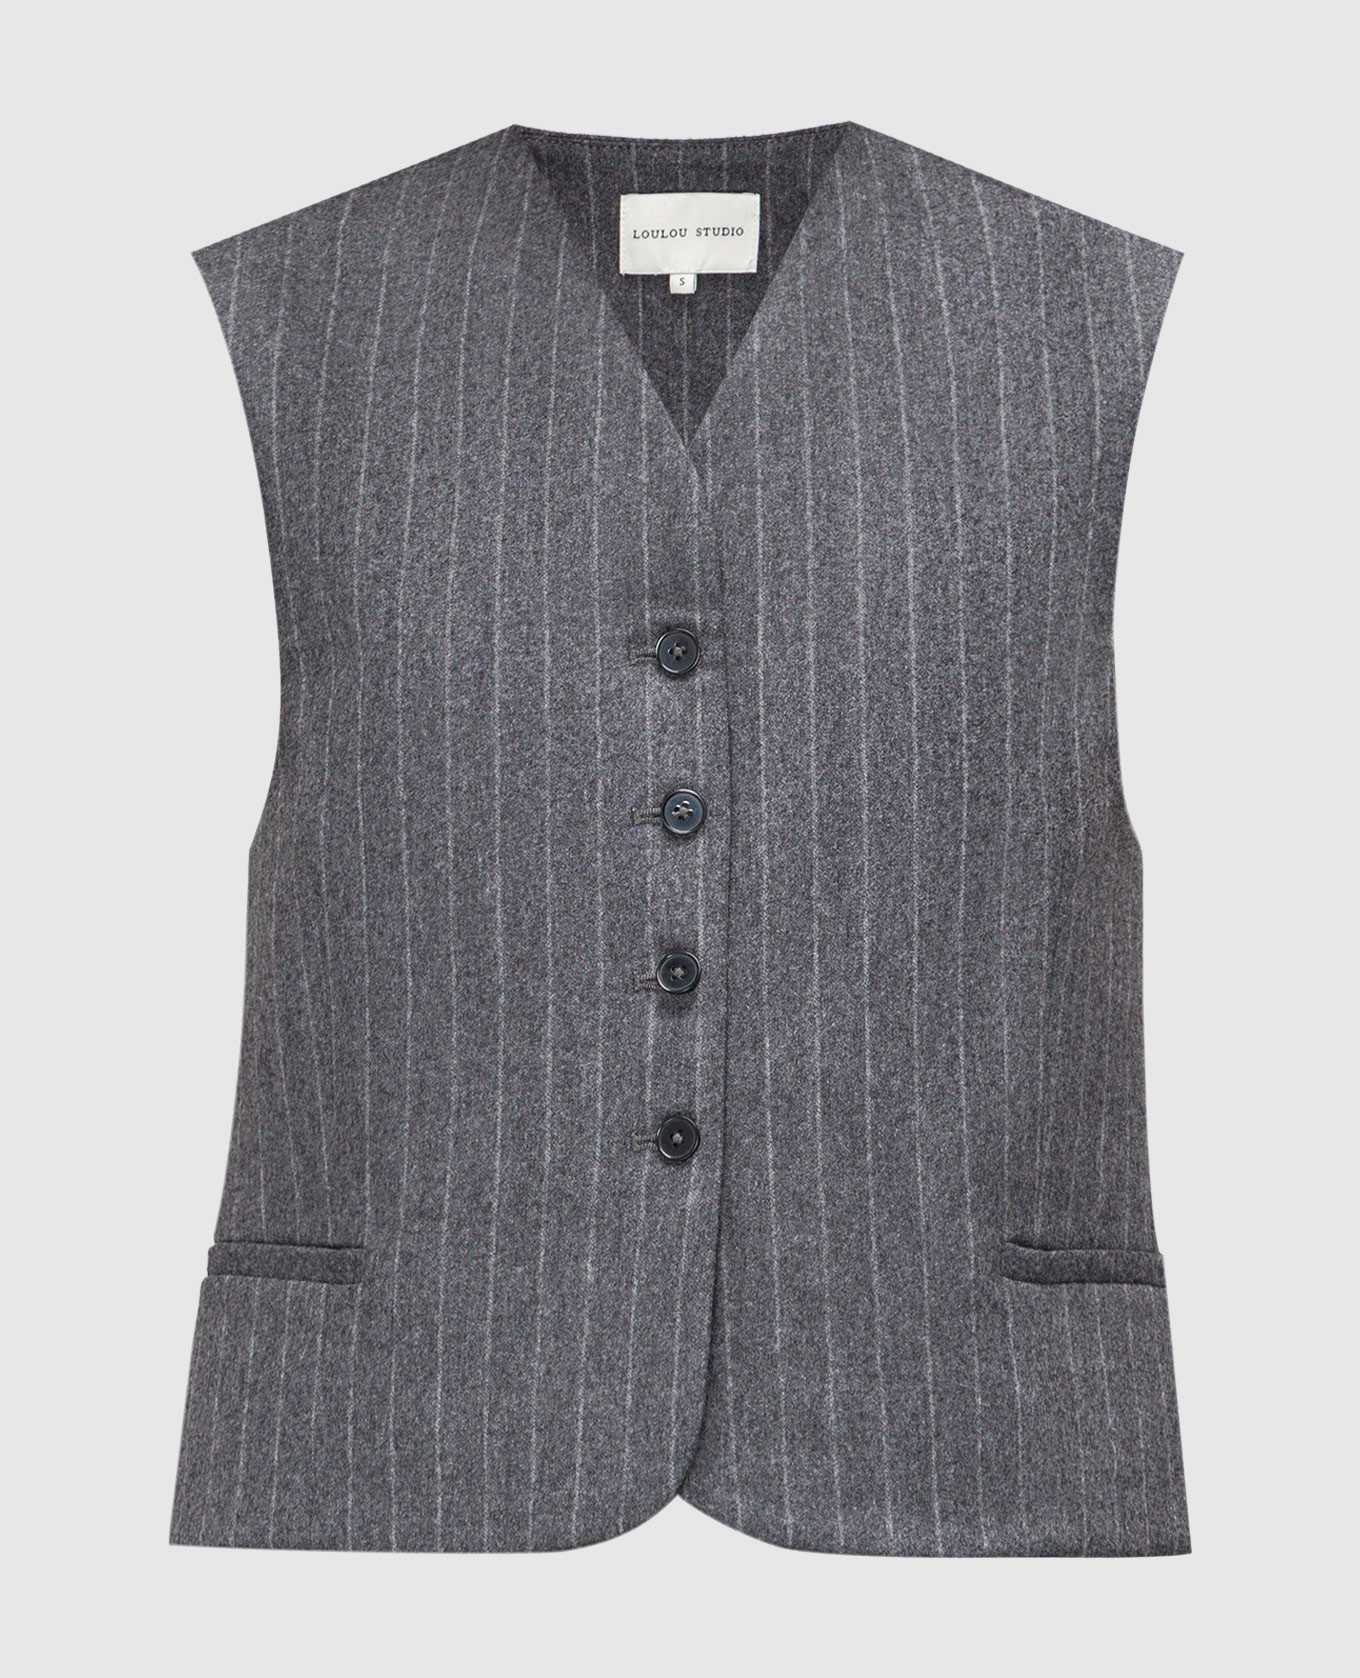 Smith wool and cashmere striped vest in gray